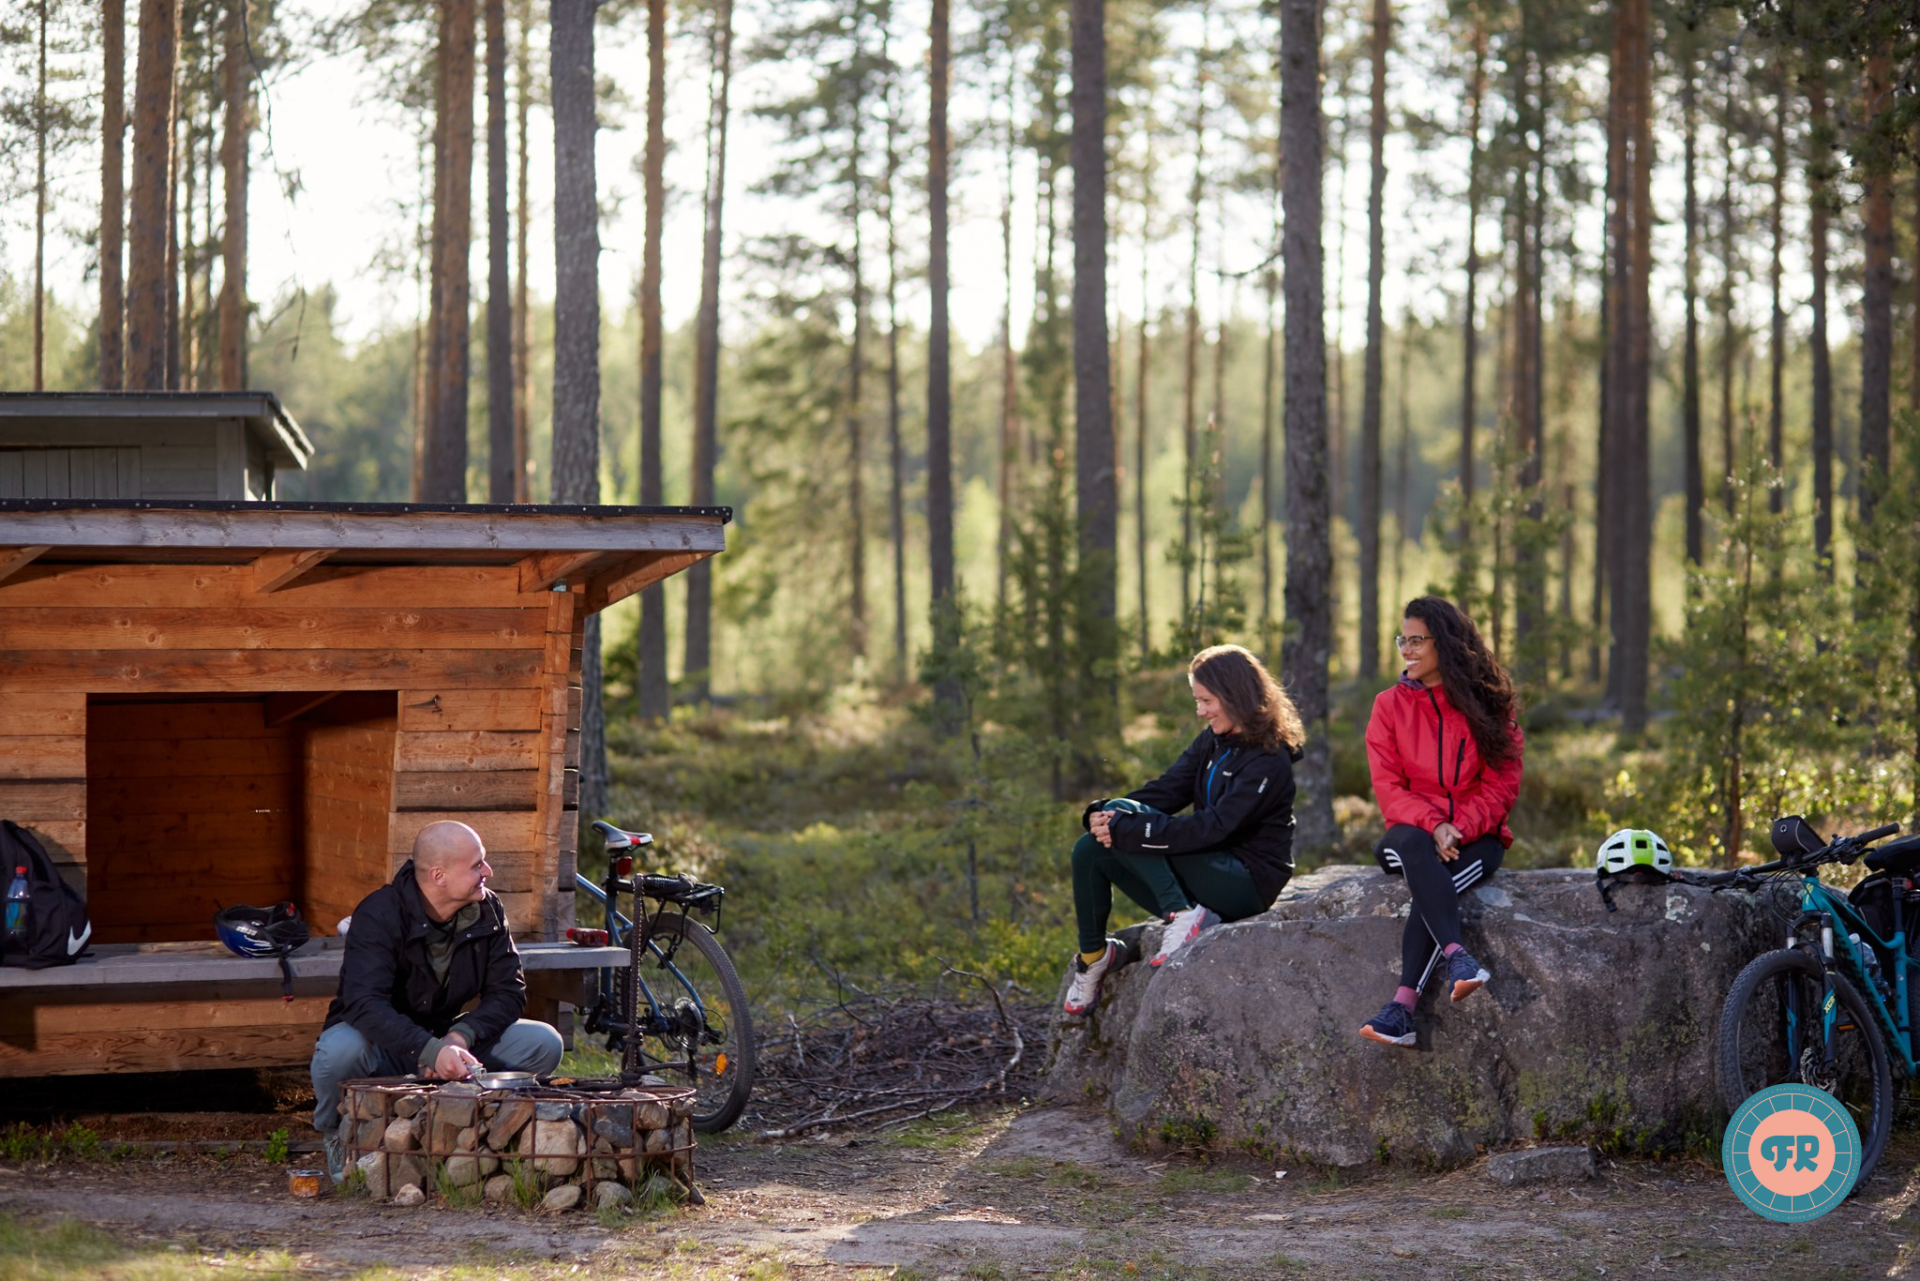 Cyclists sitting at a lean-to in the forest.